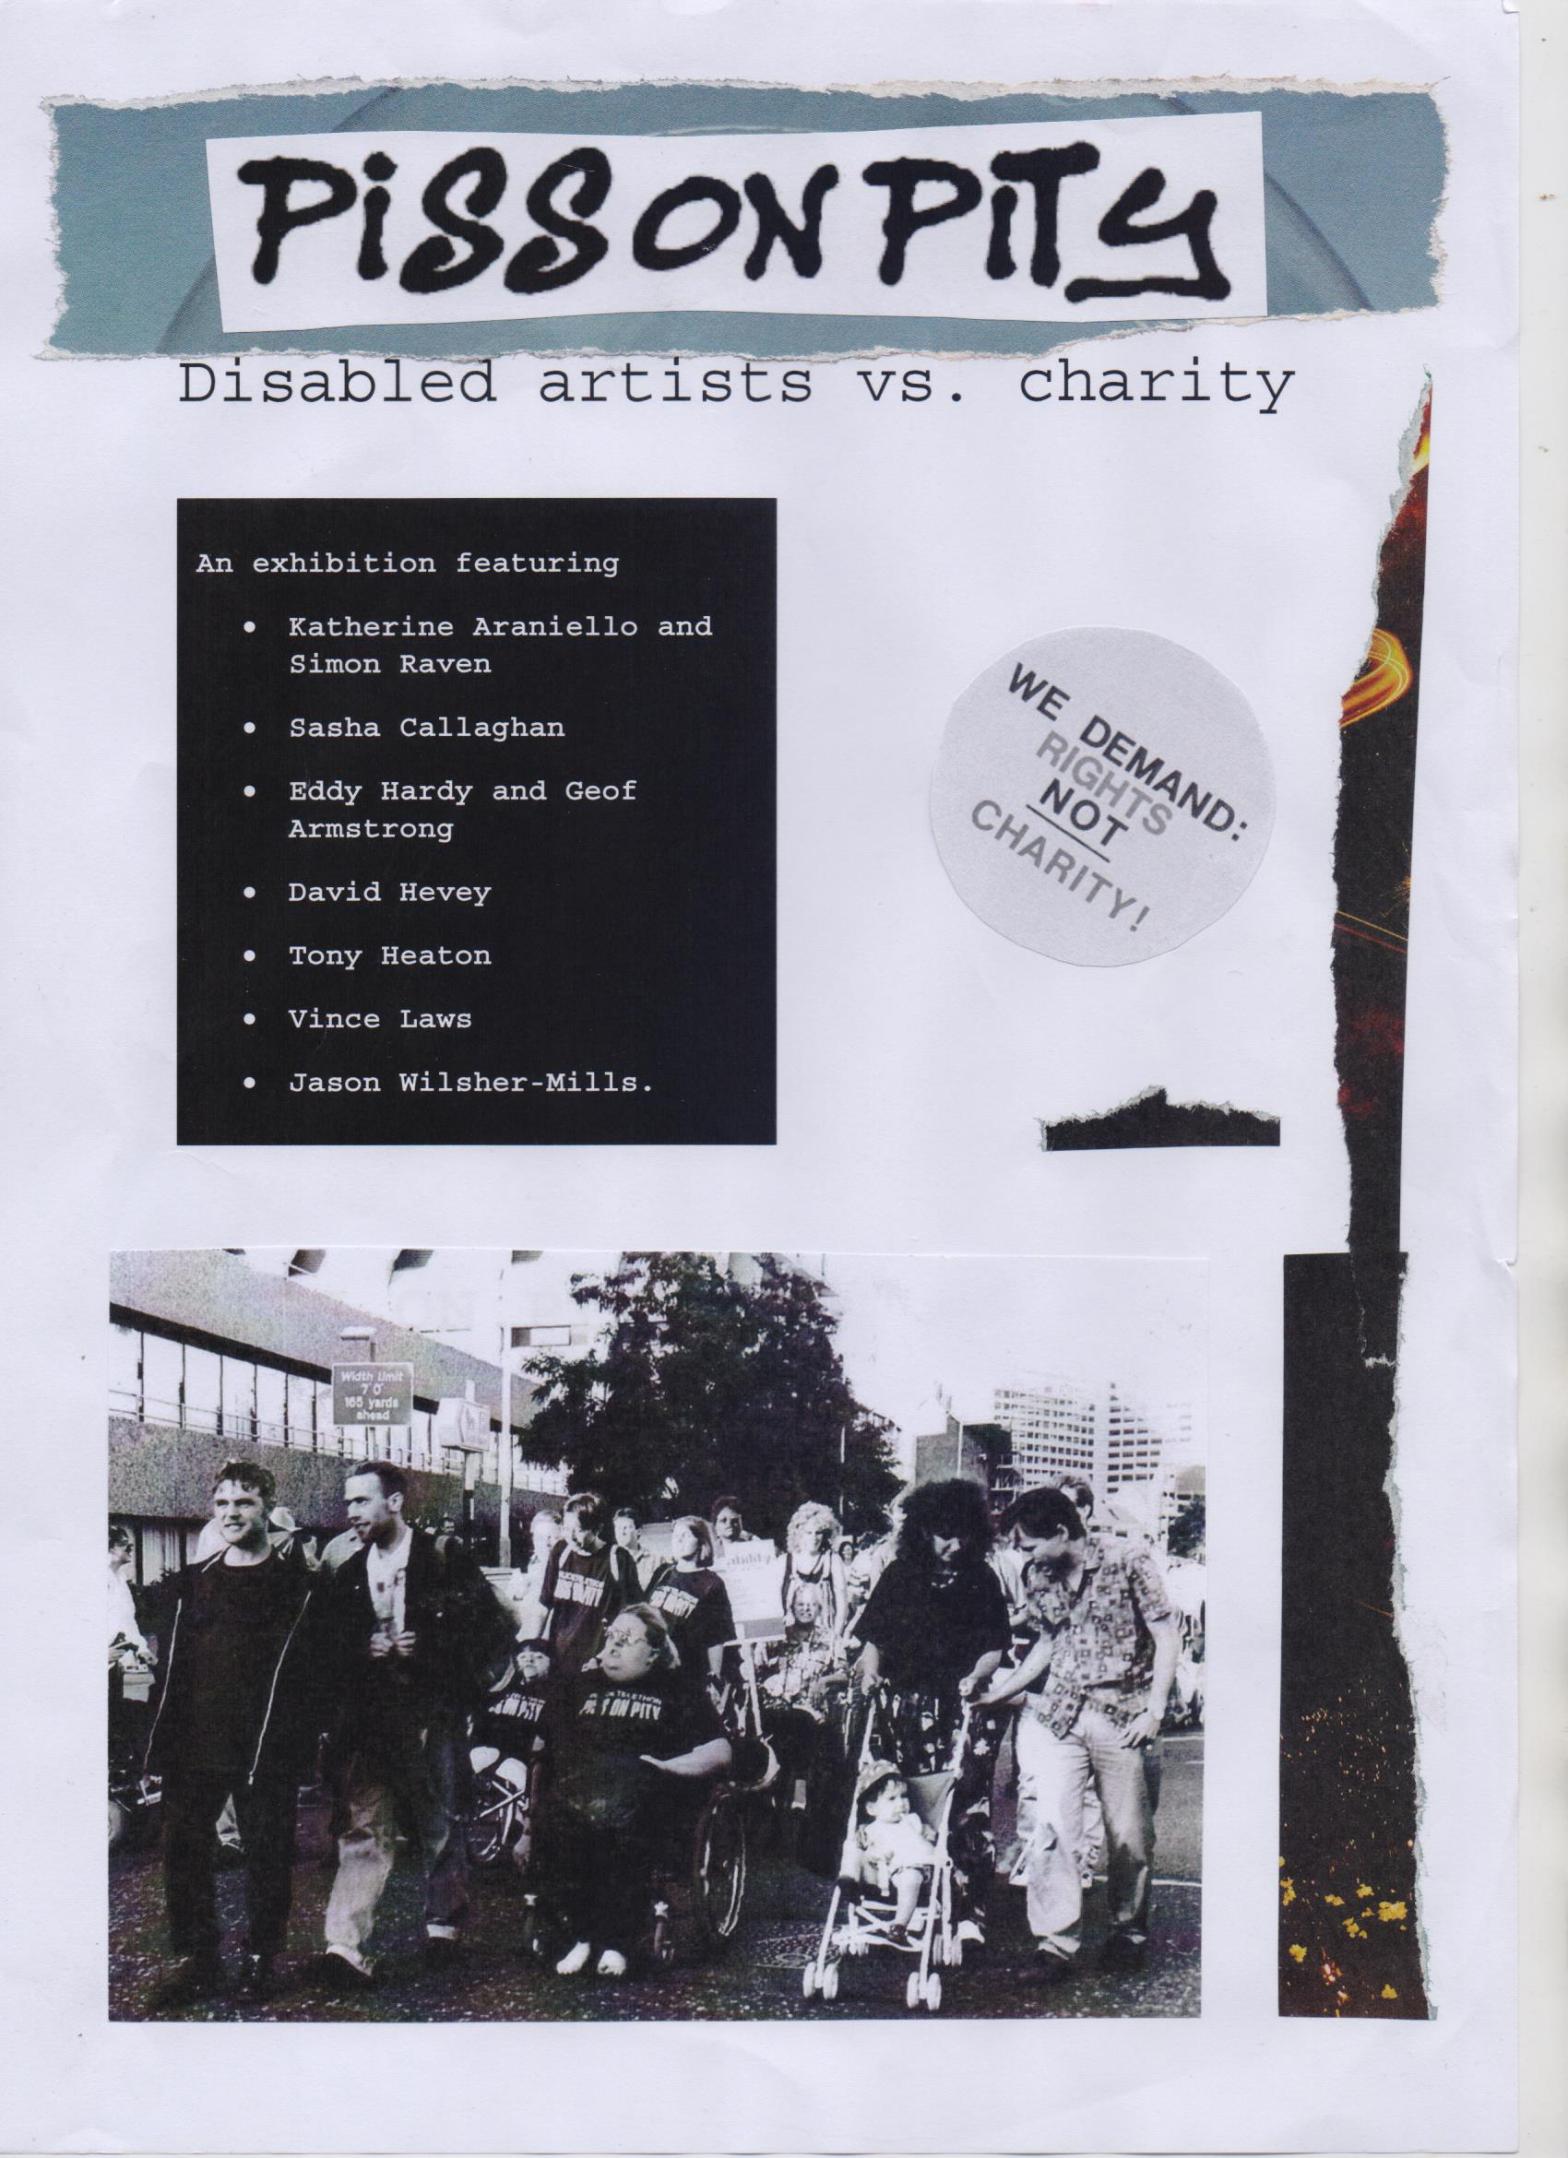 Front cover of Piss on Pity zine-catalogue. Photo of anti-Telethon disabled protestors in 1992, plus badge: WE DEMAND RIGHTS NOT CHARITY.